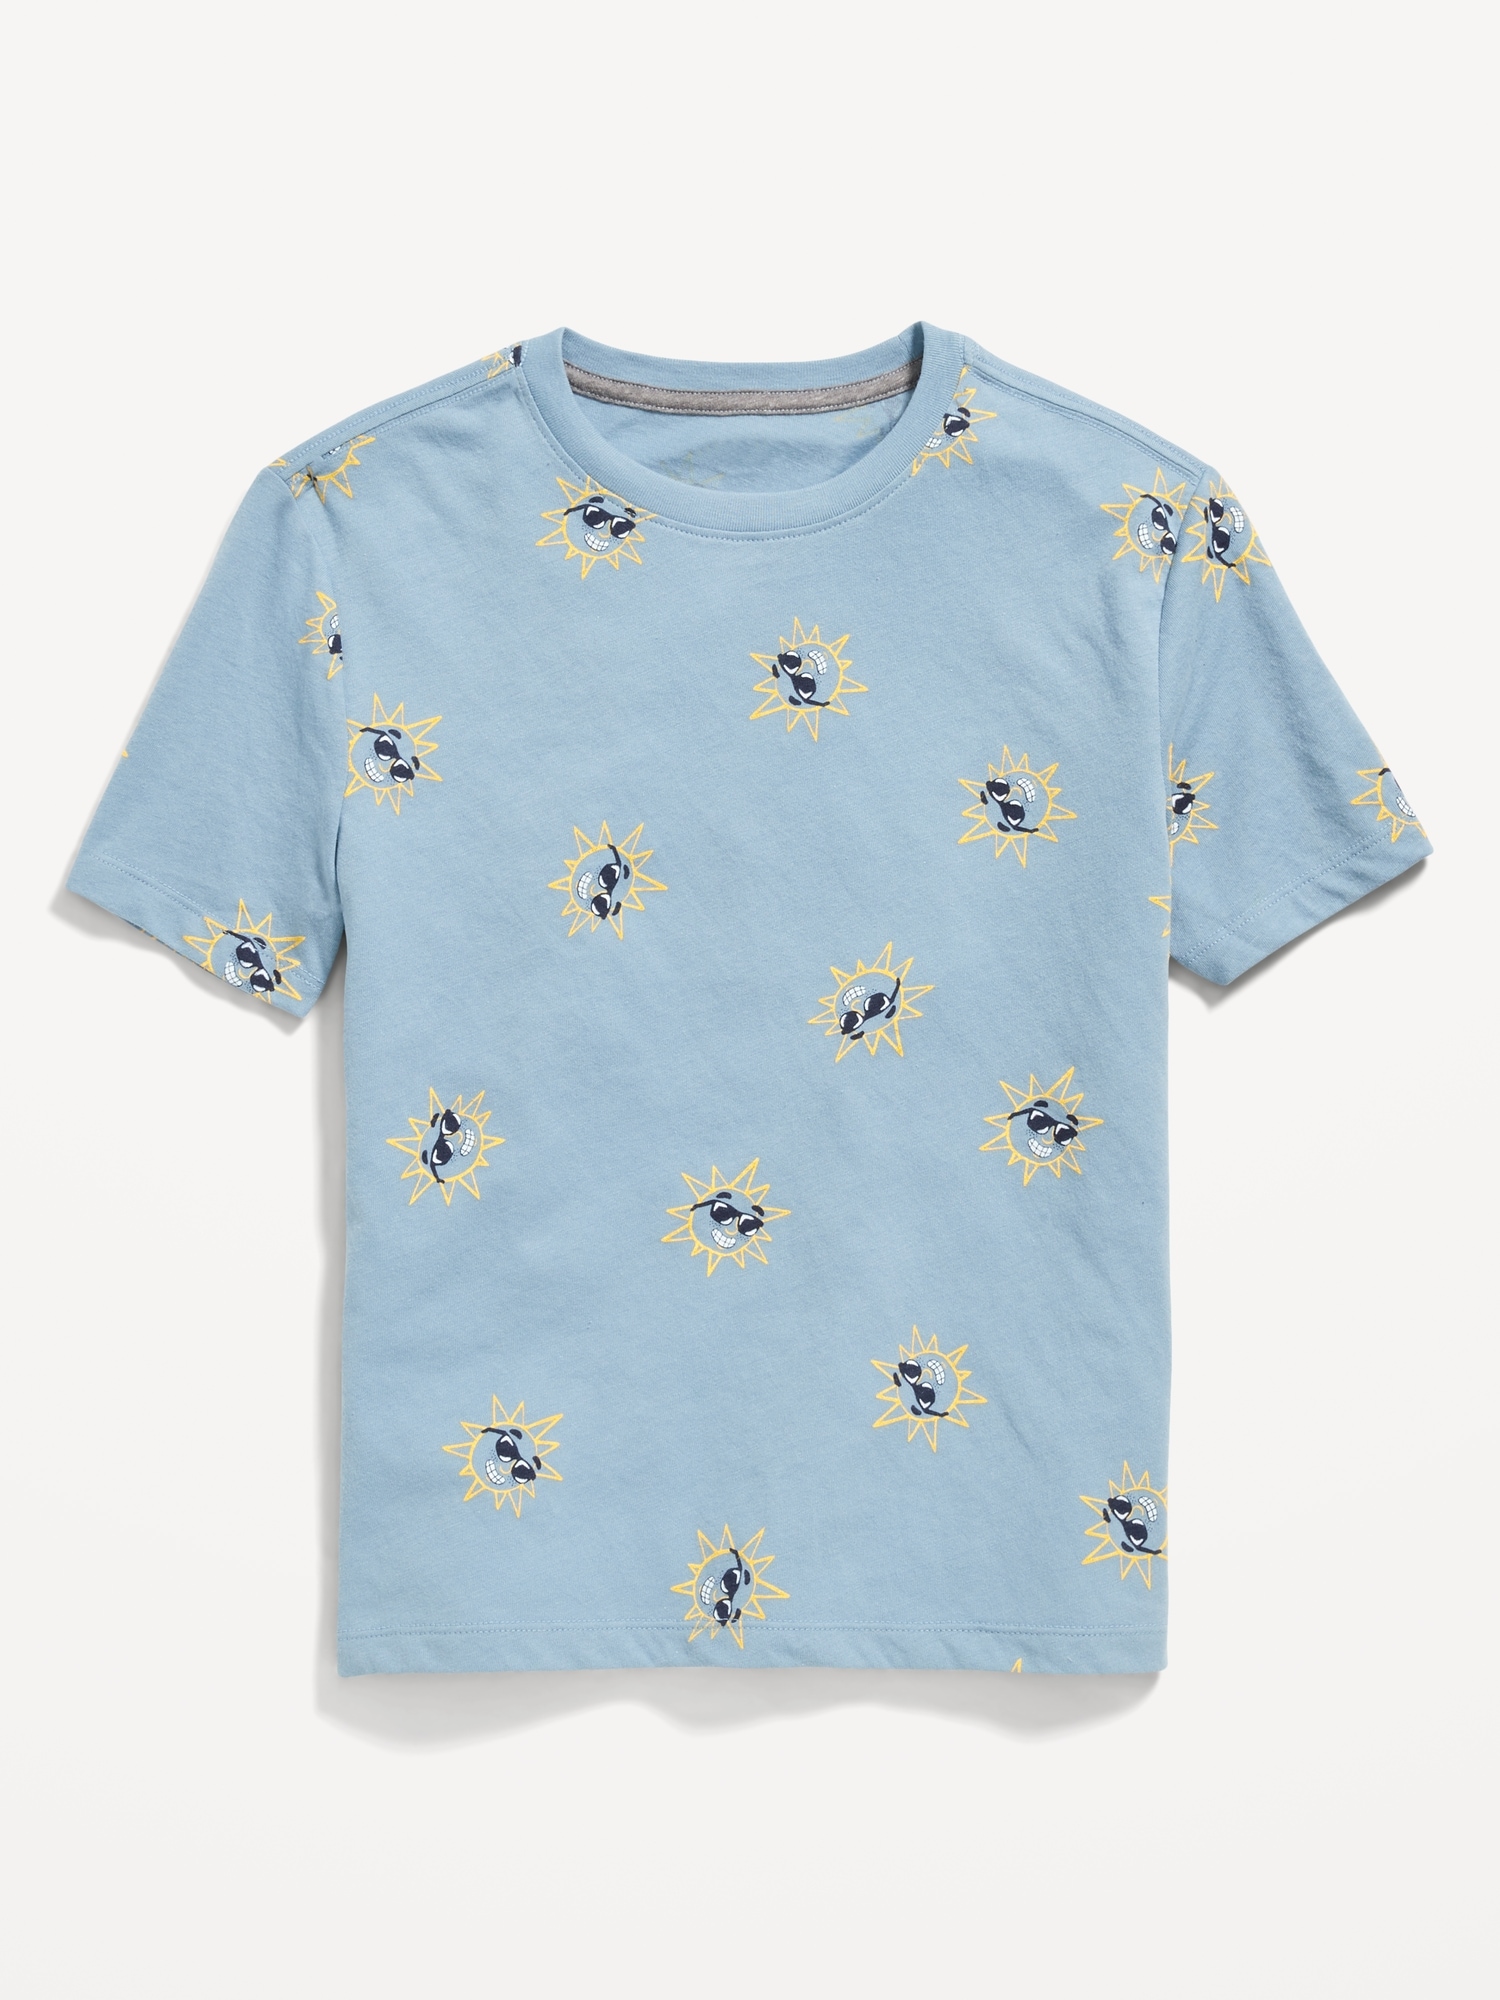 Old Navy Softest Printed Crew-Neck T-Shirt for Boys blue. 1